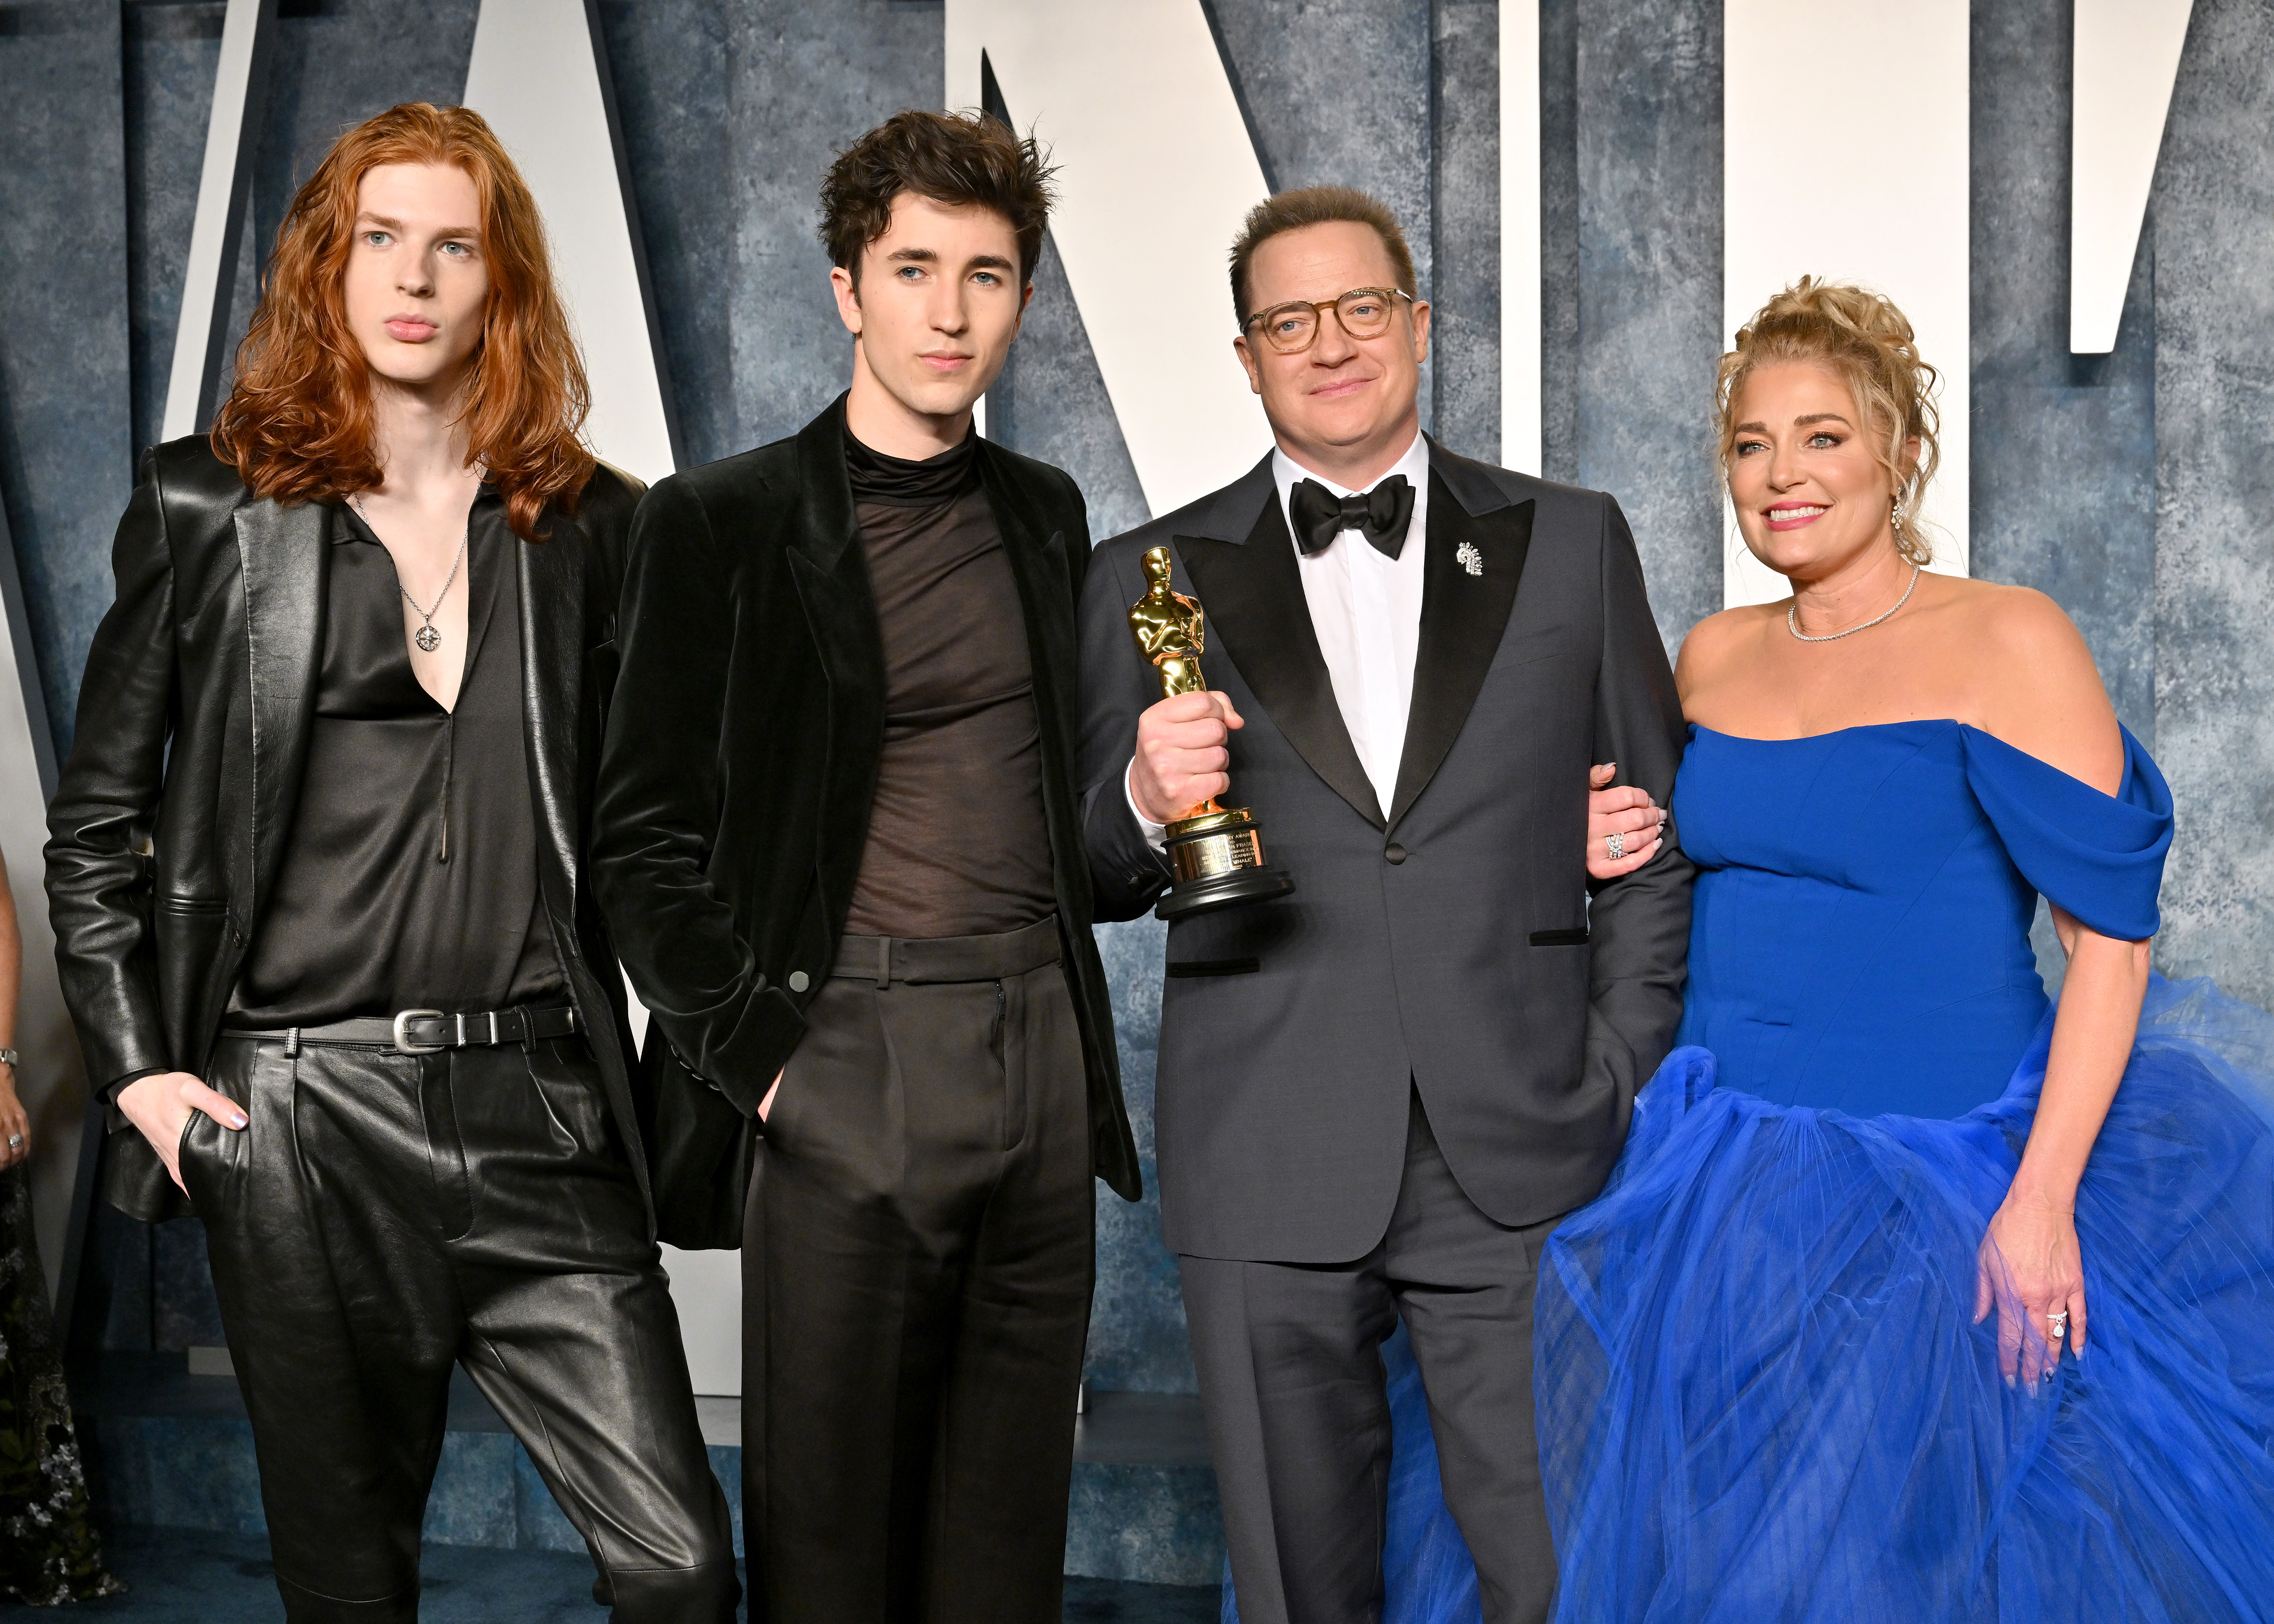 Holden Fletcher Fraser, Leland Francis Fraser, Brendan Fraser and Jeanne Moore at the 2023 Vanity Fair Oscar Party on March 12, 2023 in Beverly Hills, California. | Source: Getty Images